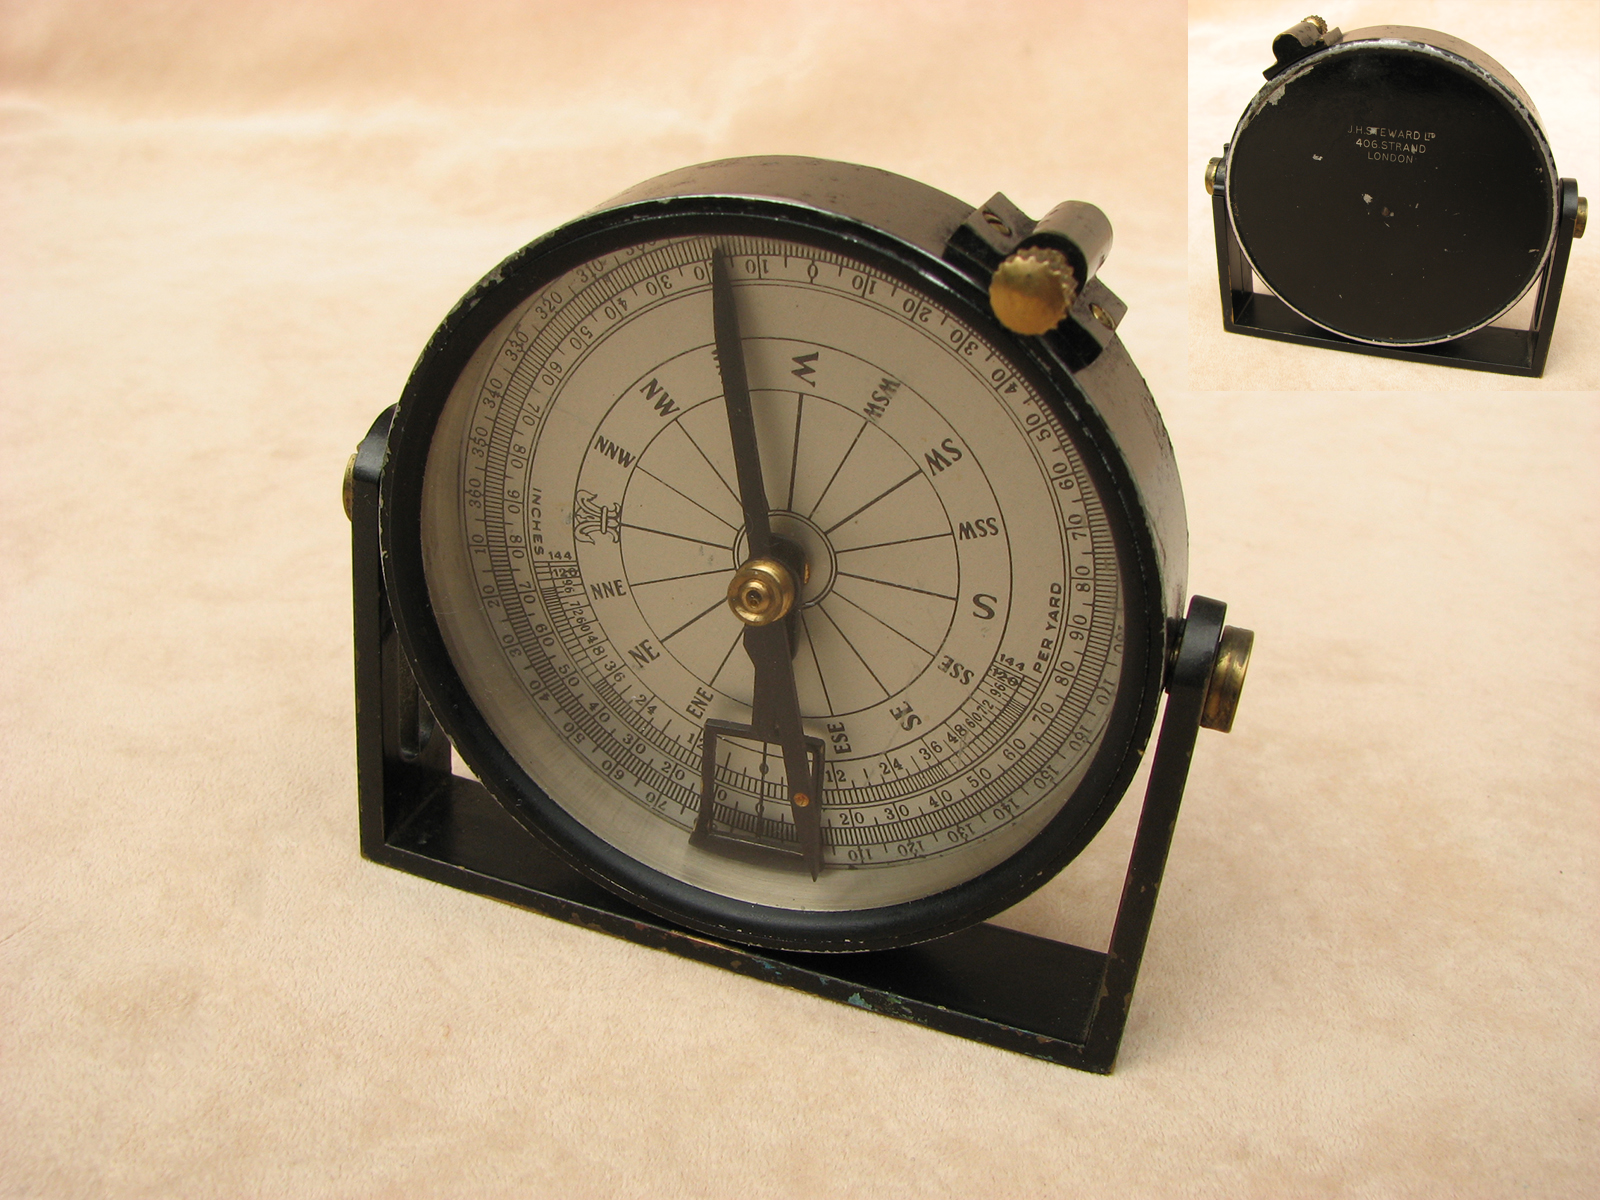 J H Steward Handle compass with clinometer